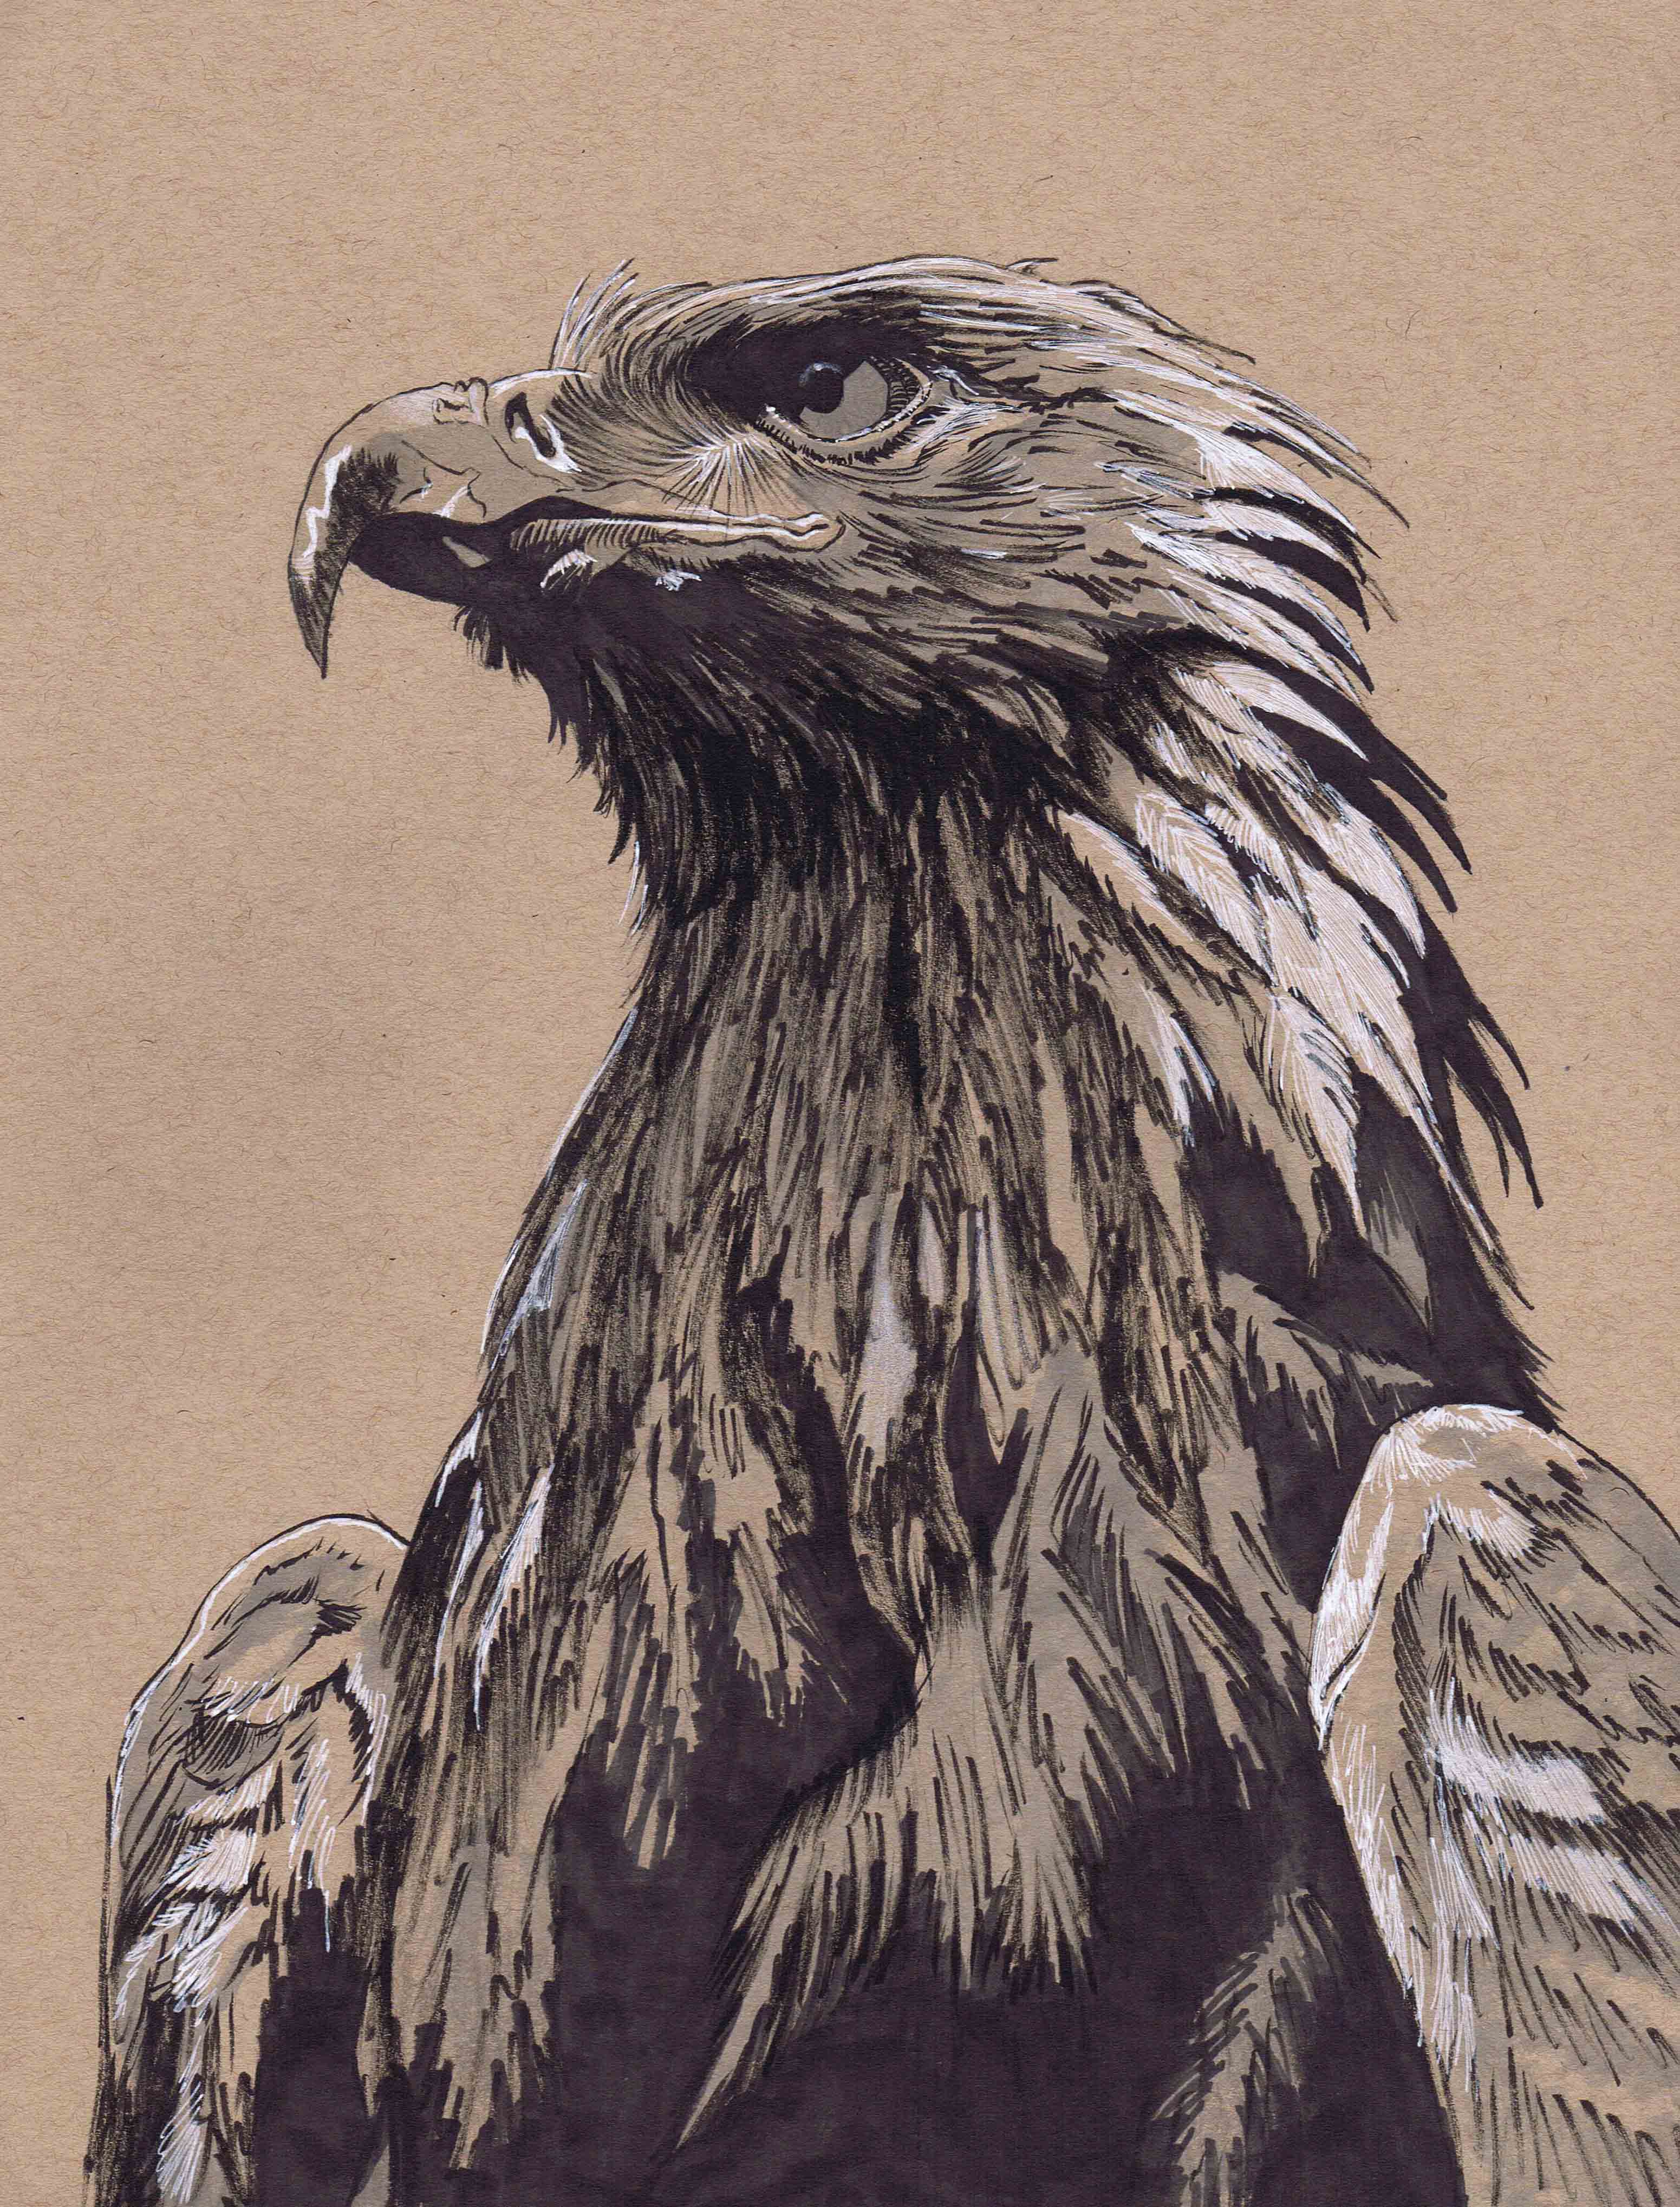 Draw animal portraits in pen brush and ink by Harrisoncollazo | Fiverr